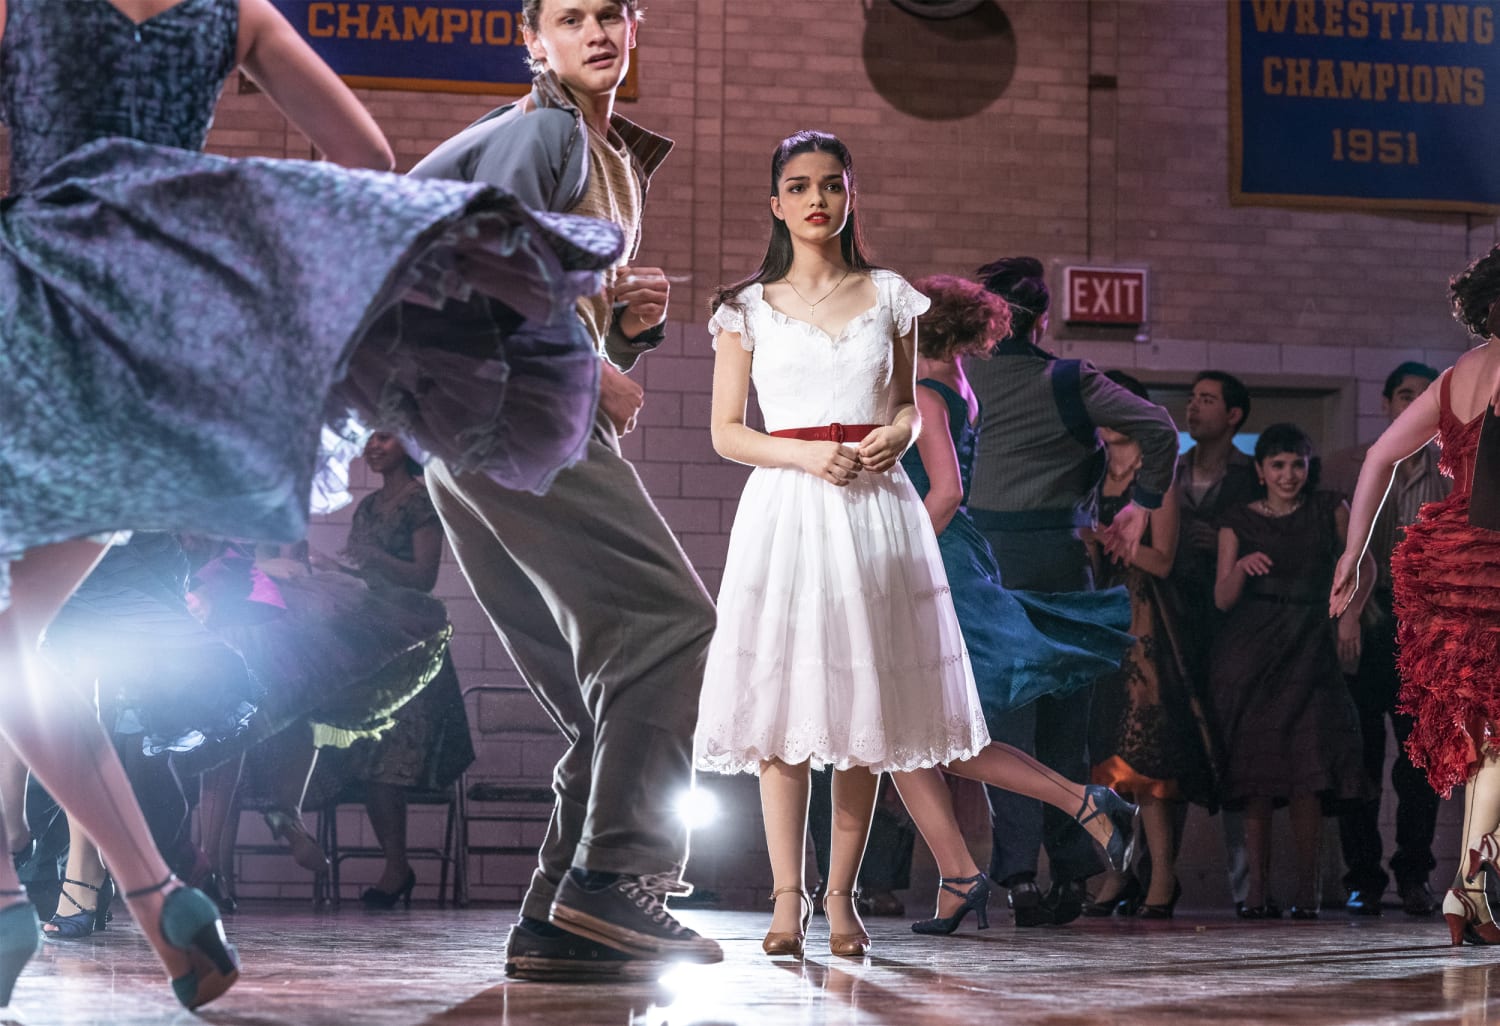 Spielberg ditches the brownface in a ‘West Side Story’ remake that centers Puerto Ricans